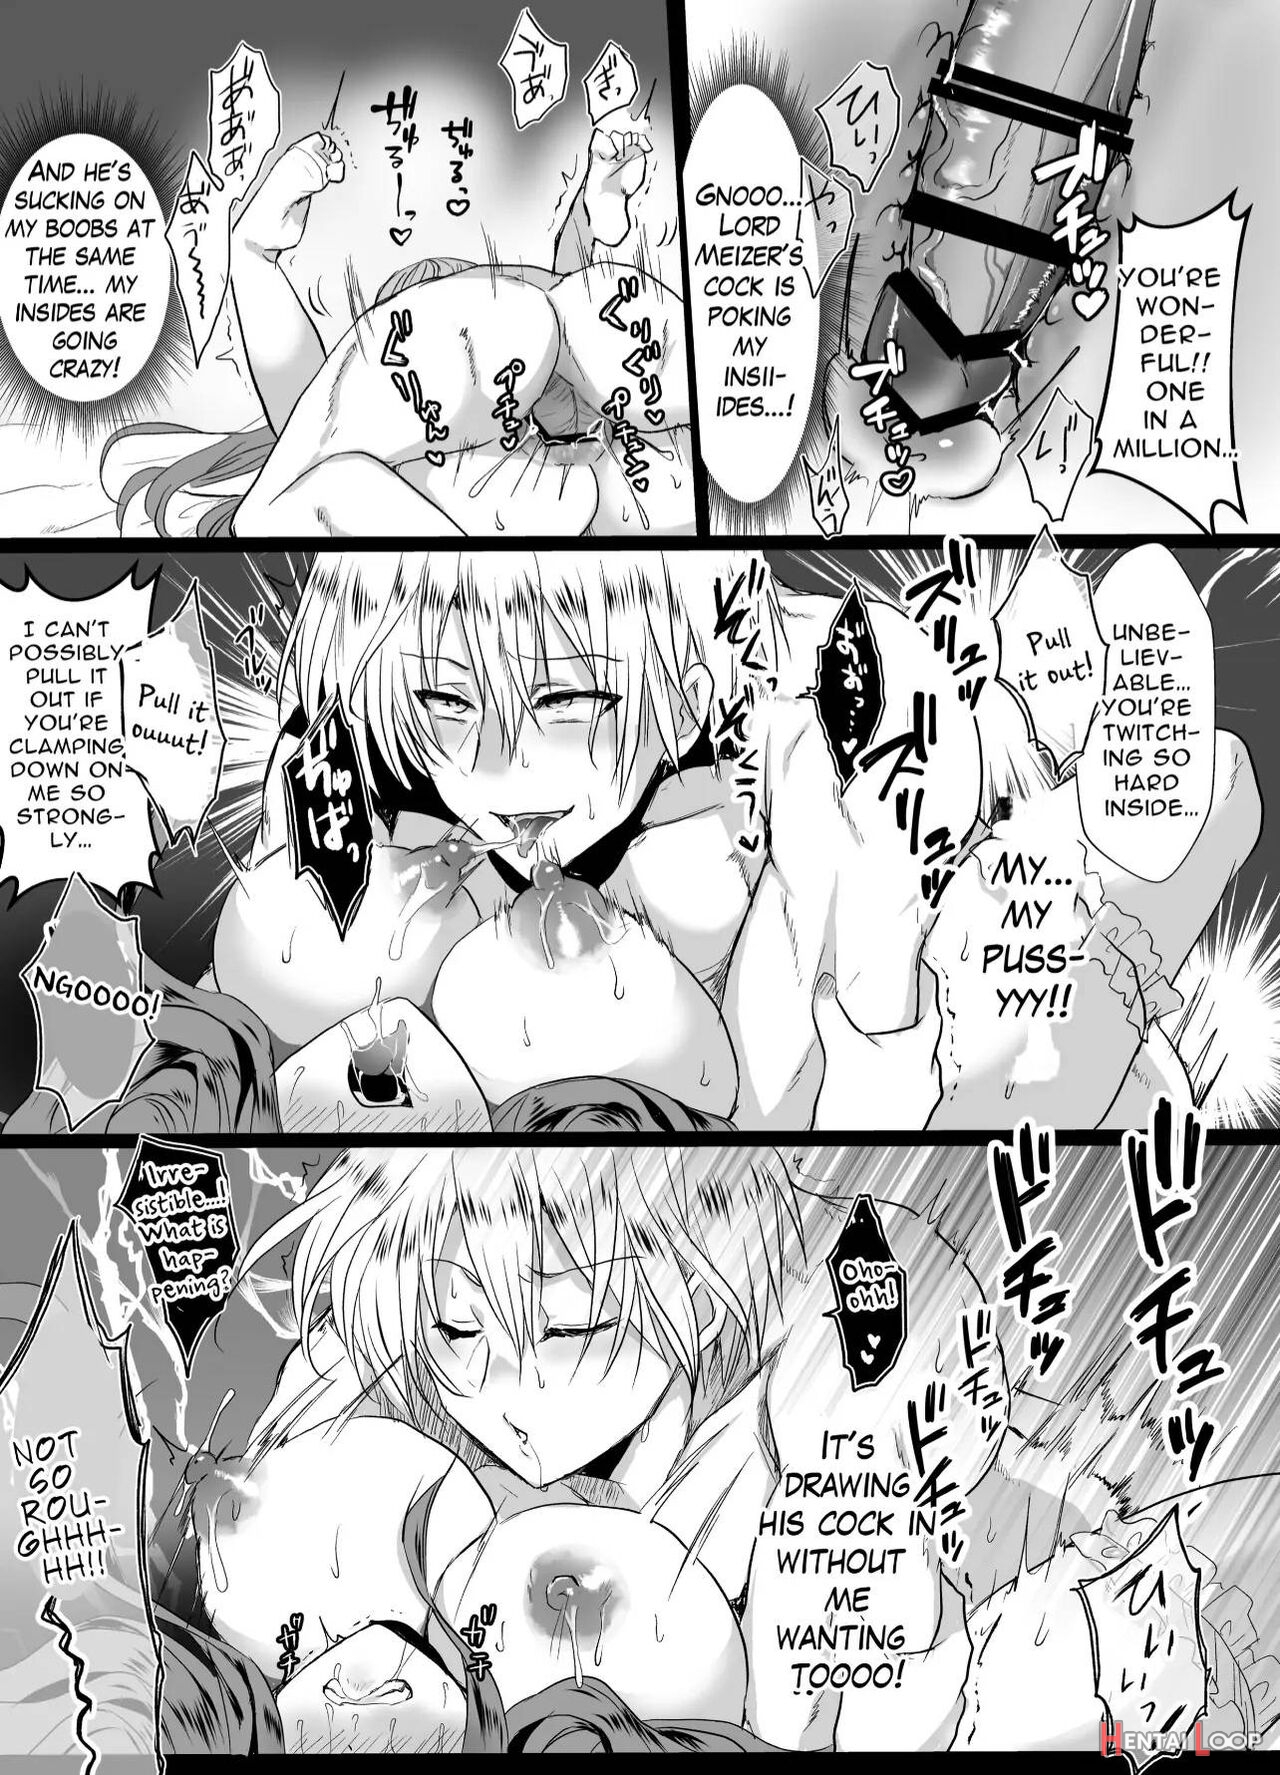  jk's Tragic Isekai Reincarnation As The Villainess ~but My Precious Side Character!~ page 41